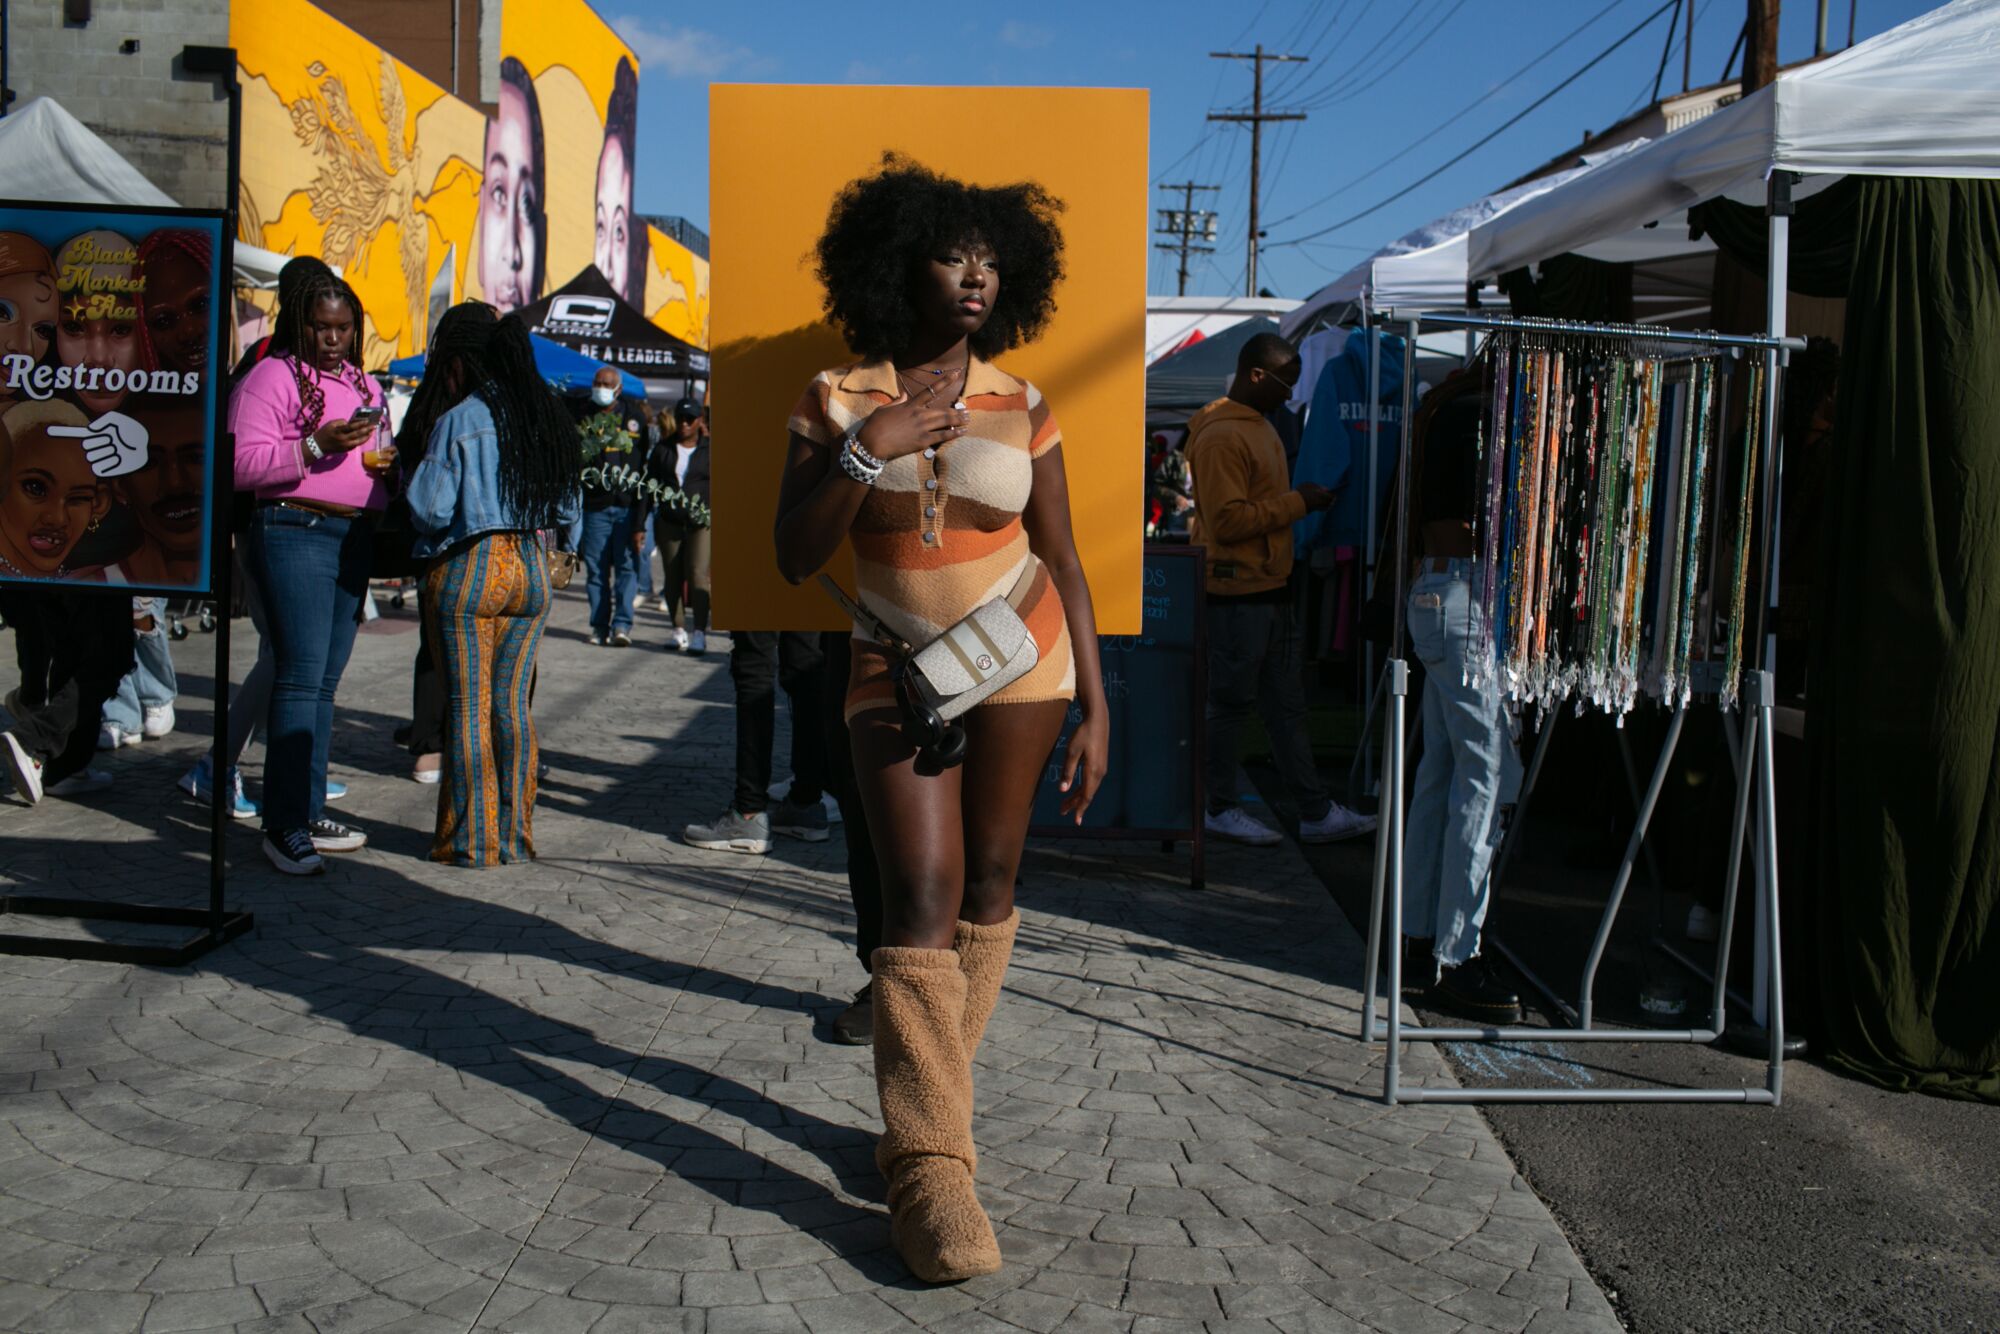 Diamond Gabriel poses for a portrait while attending Black Market Flea held at the Beehive.